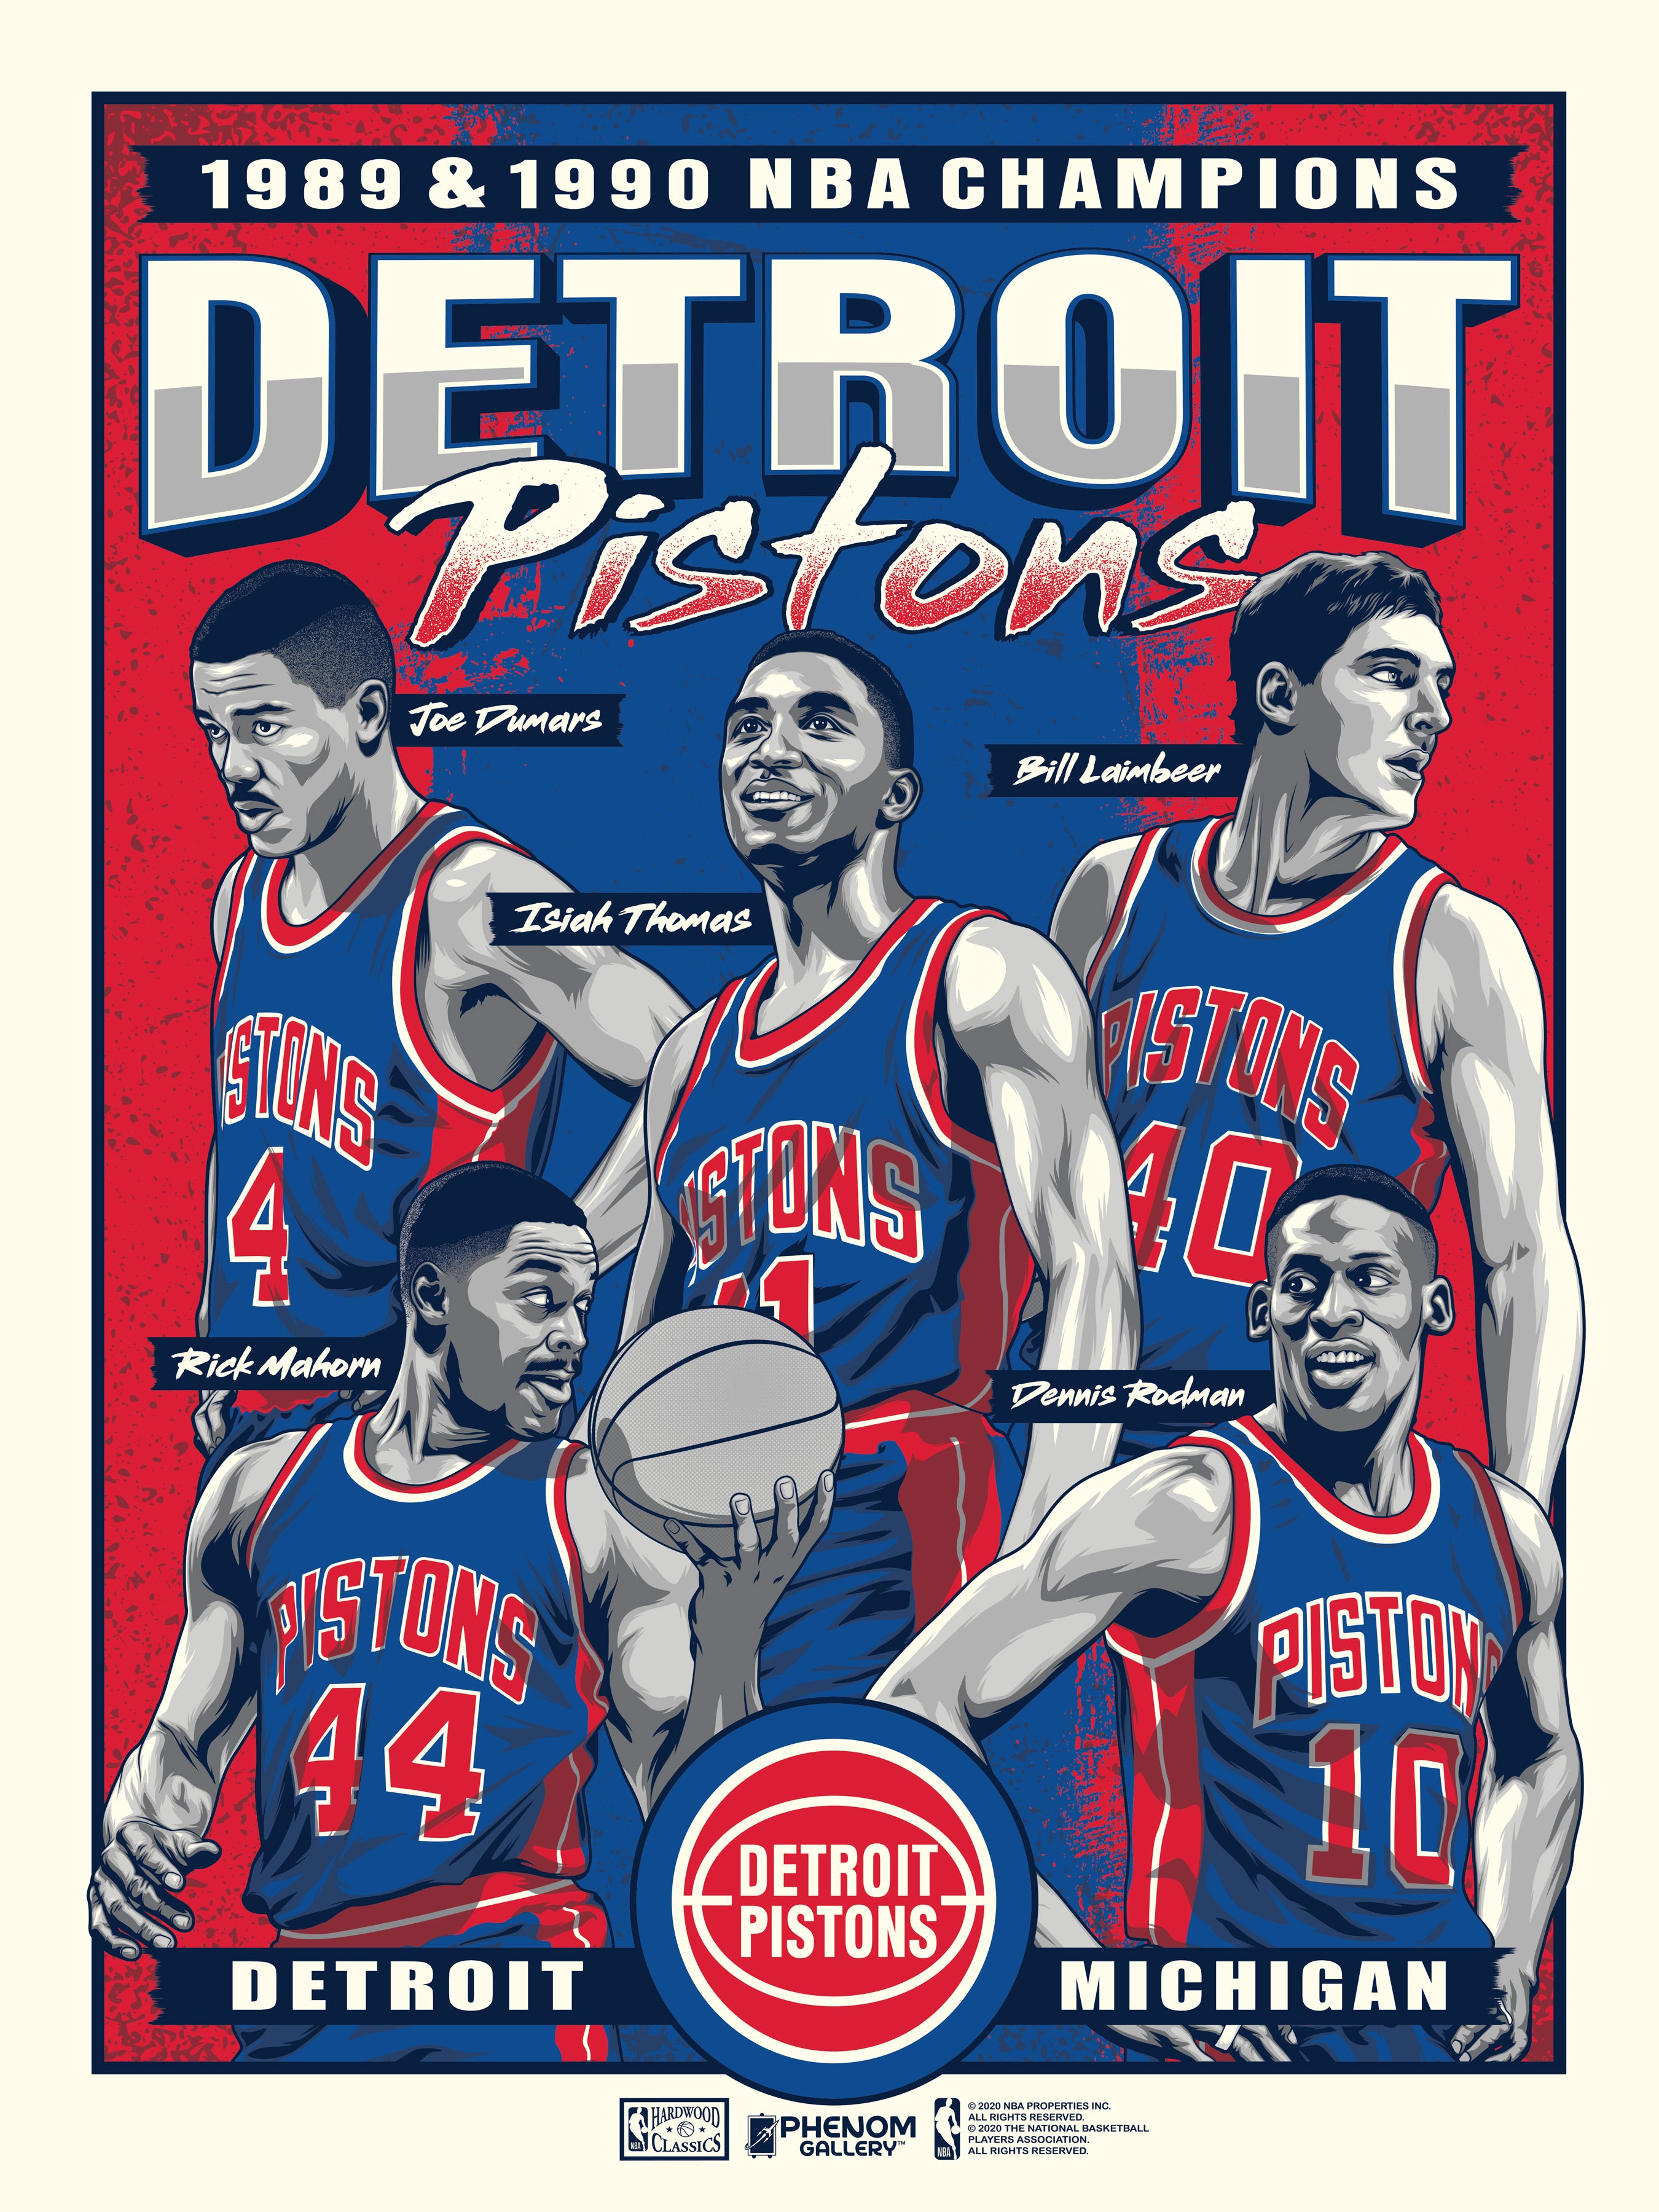 Official detroit lions pistons red wings and tigers city of